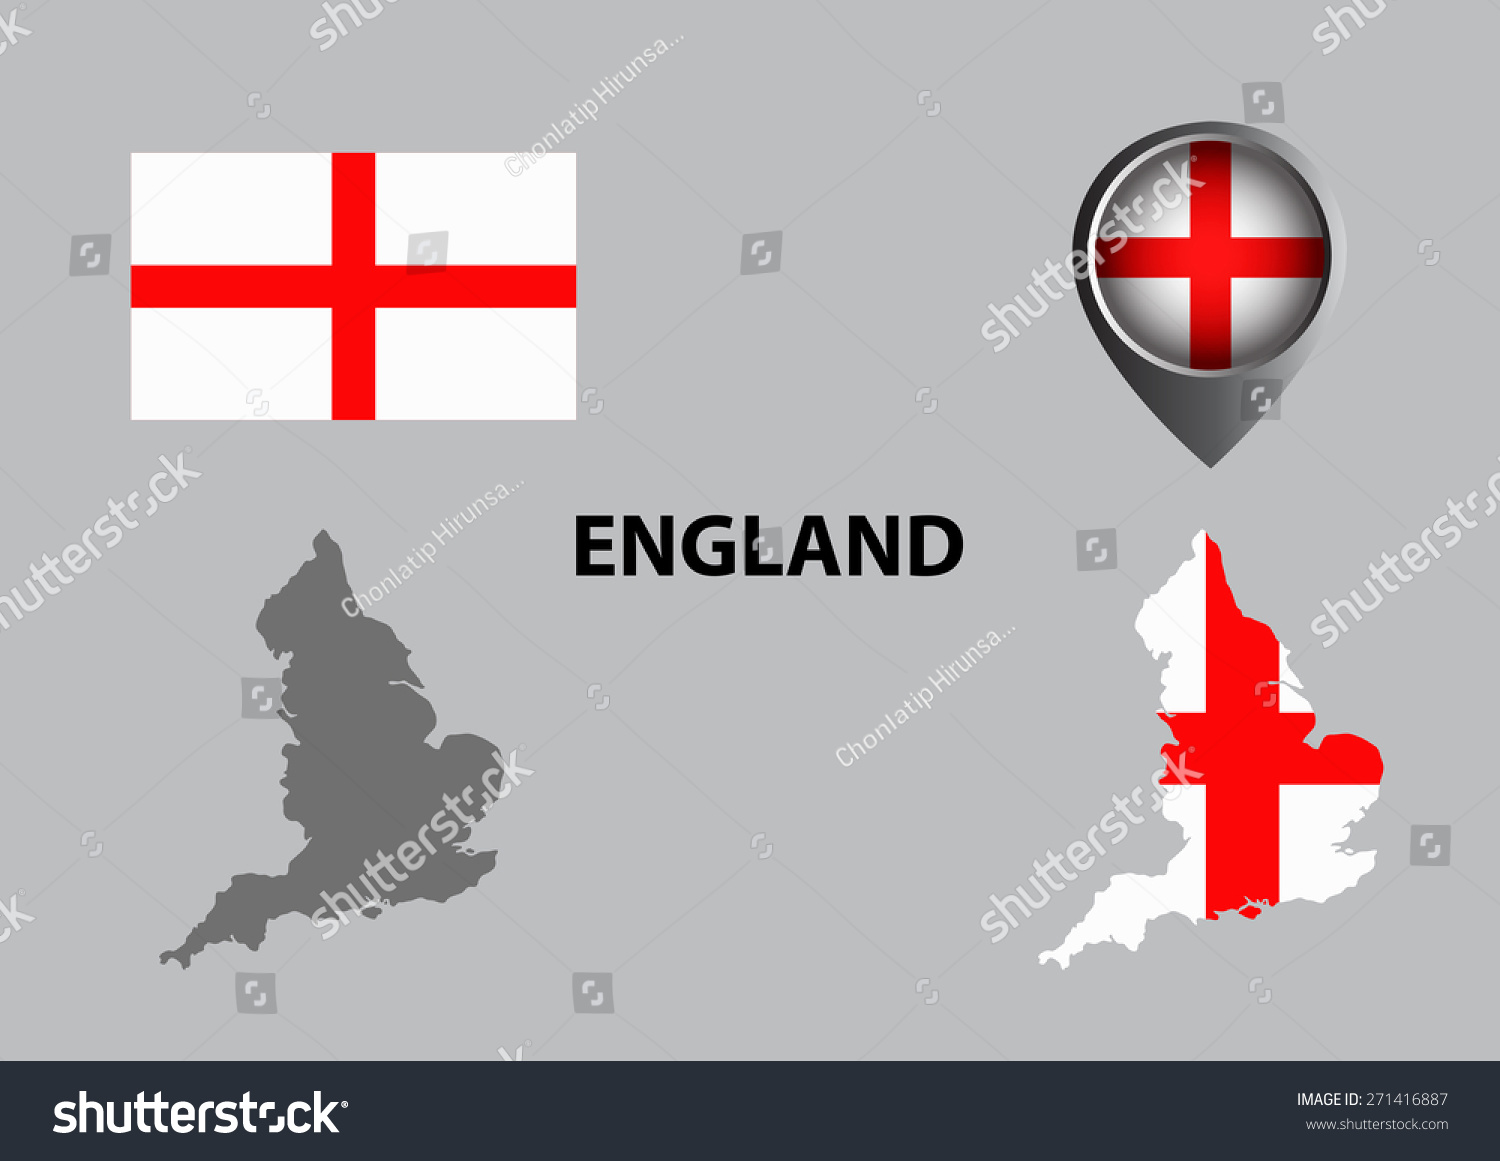 Map of England and symbol - Royalty Free Stock Vector 271416887 ...